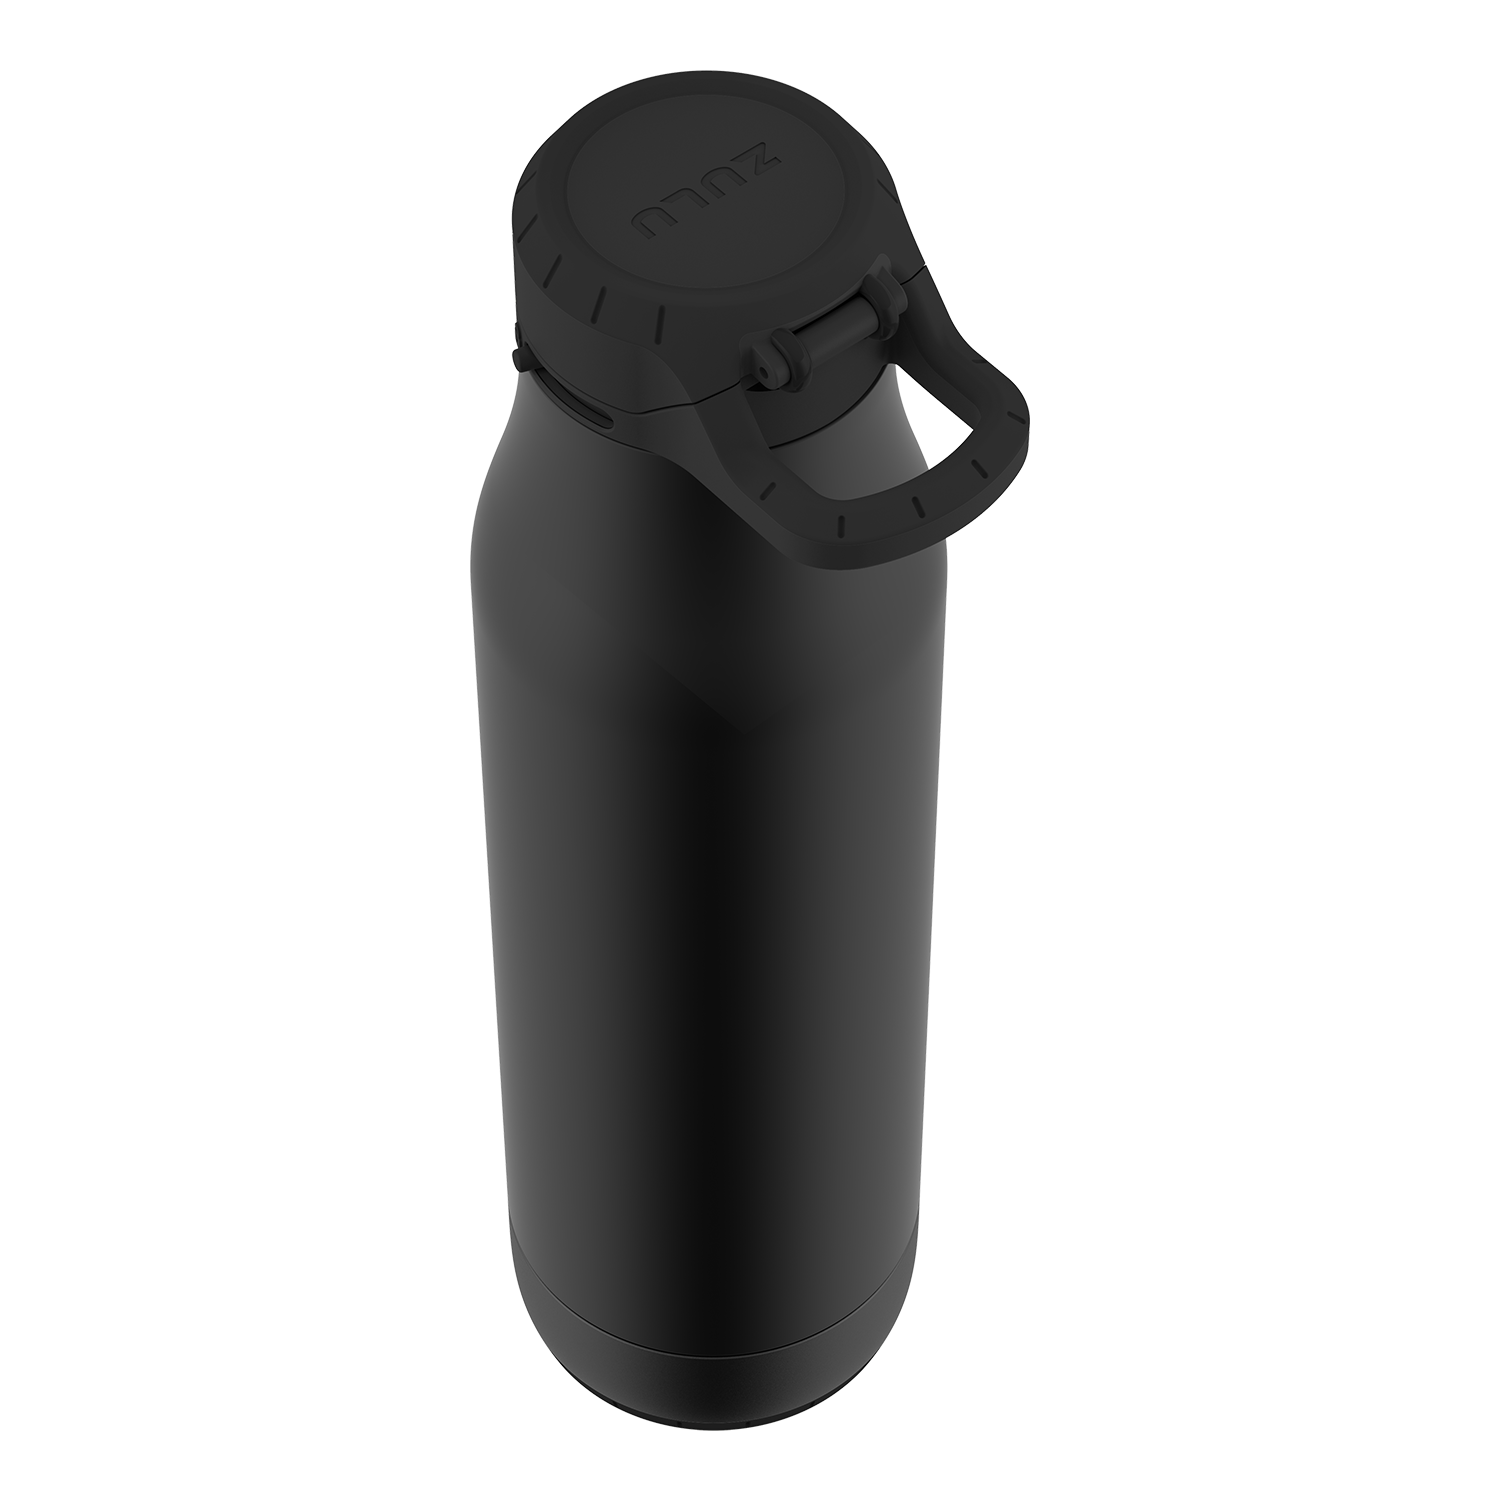 ZULU Ace Vacuum Insulated Stainless Steel Water Bottle with Removable Base  24 Oz